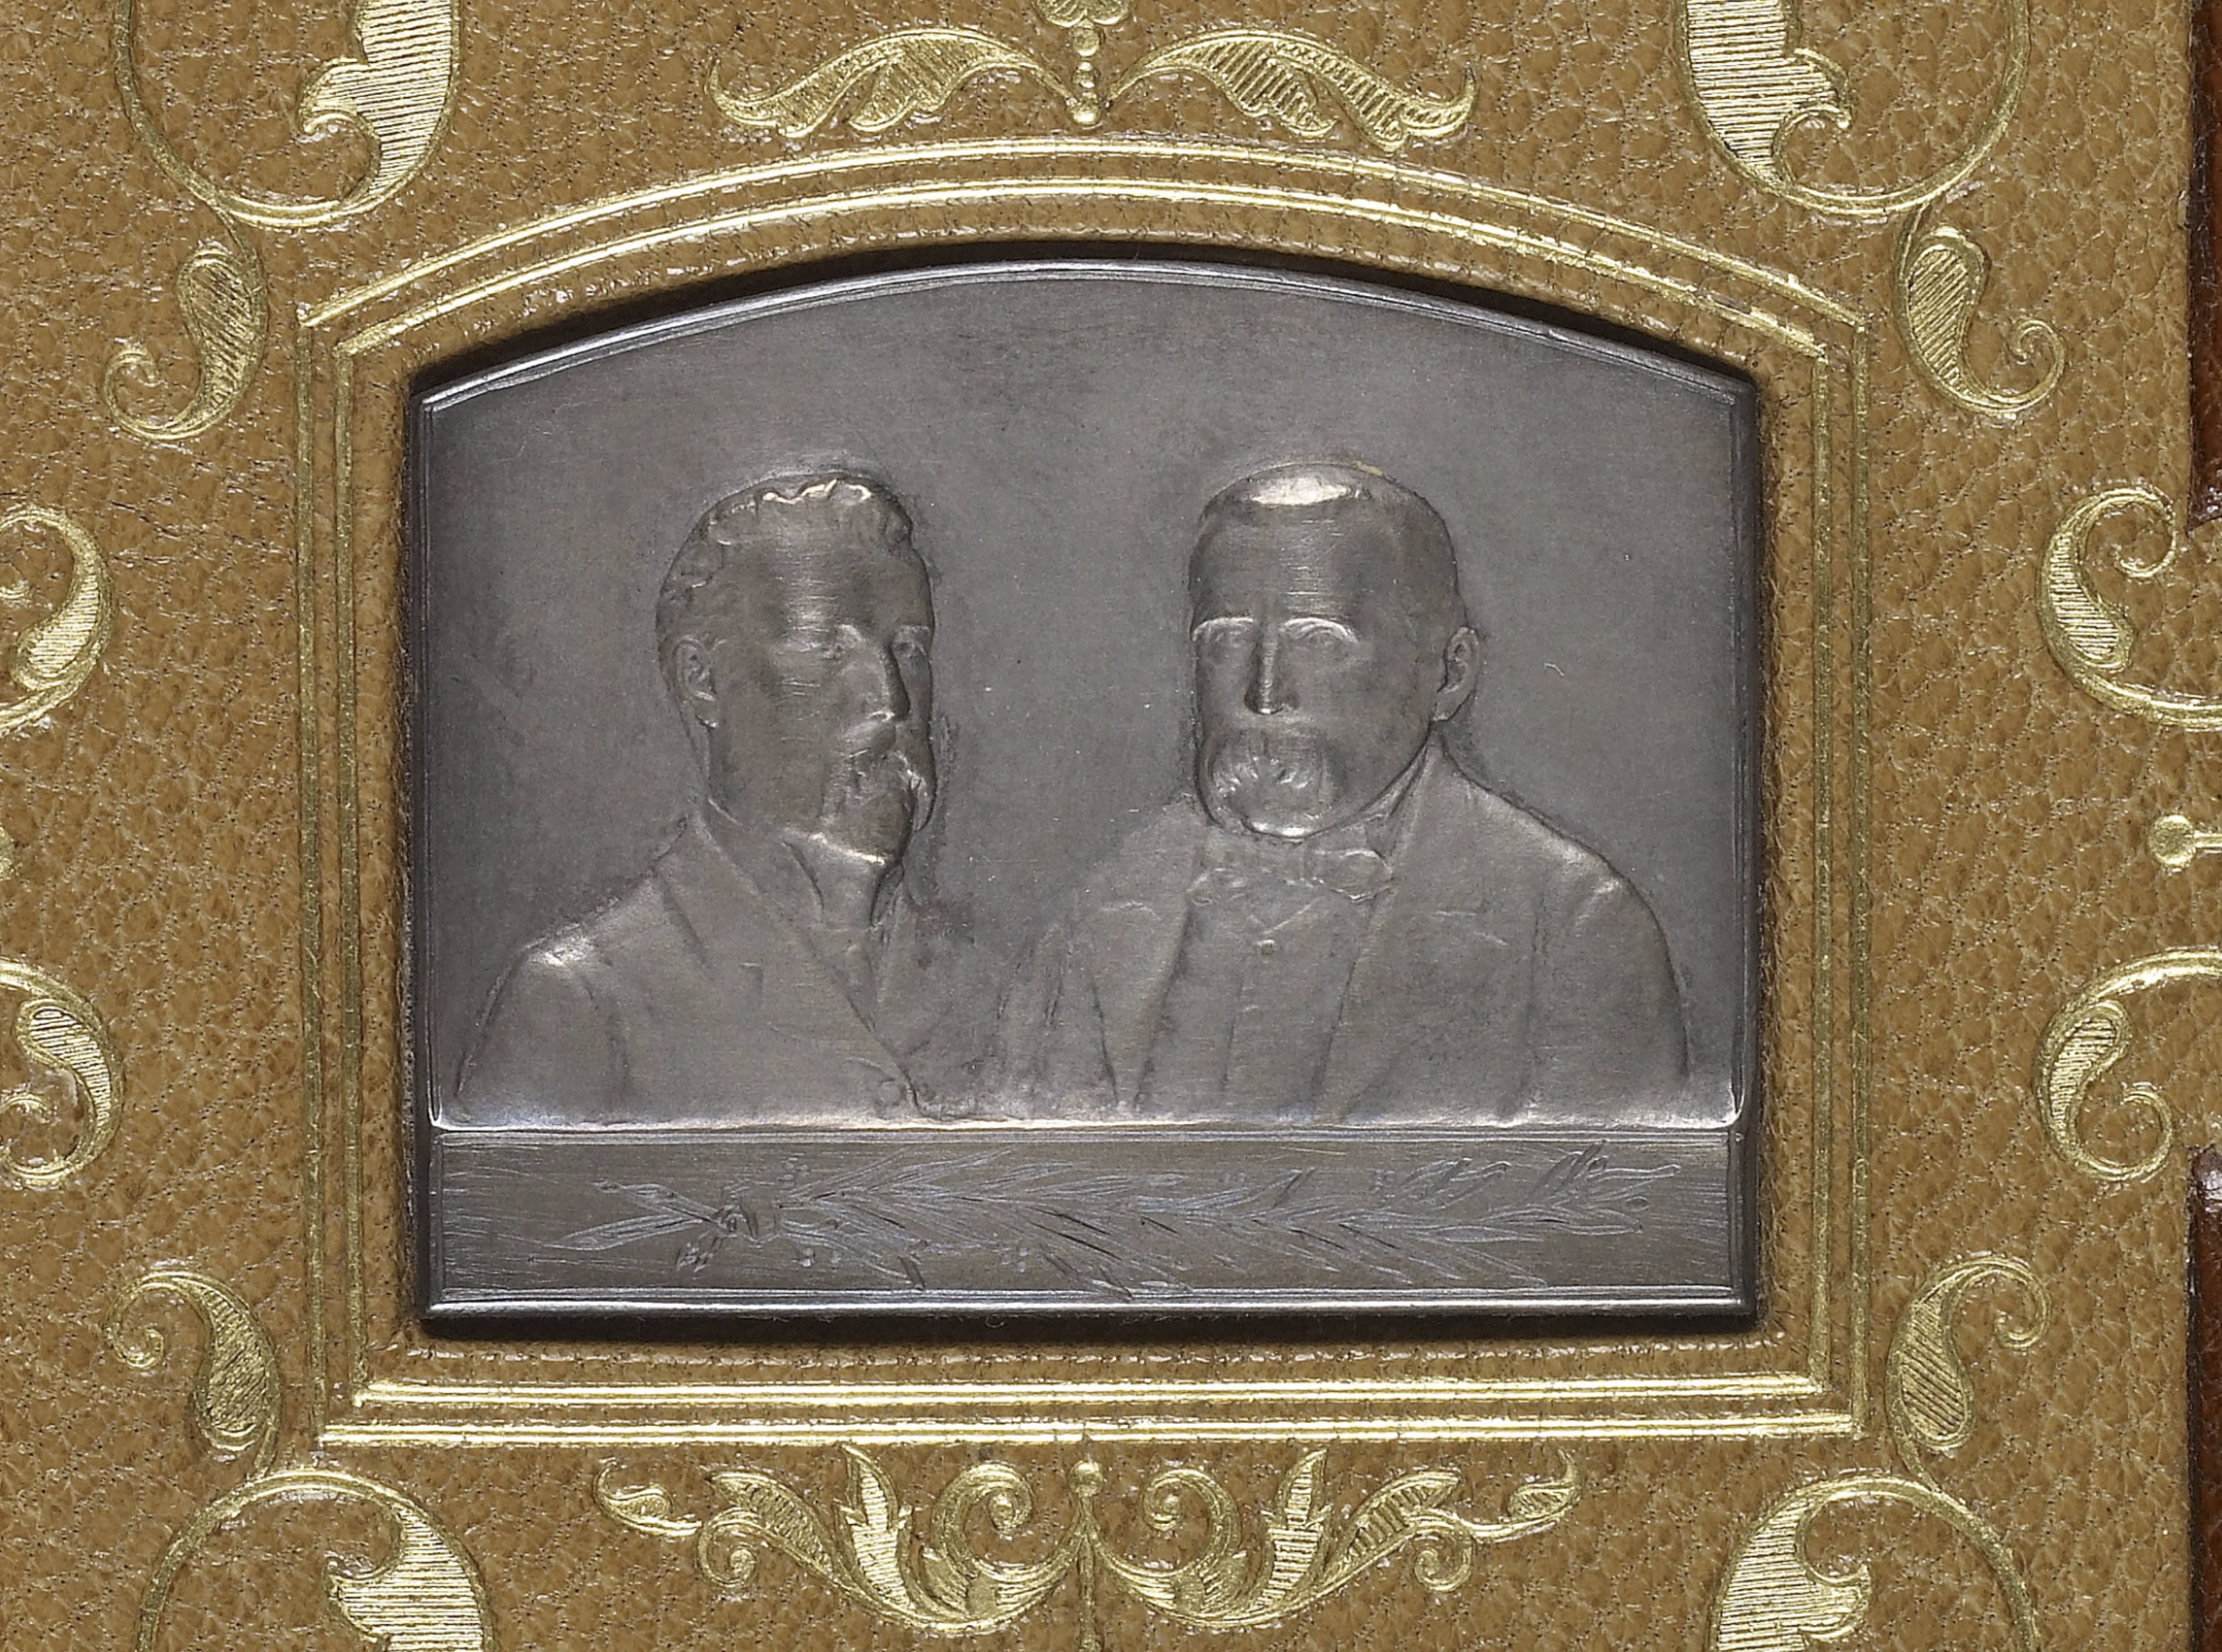 Hahlo-118, W.T. Walters and H. Walters, Esq. plaquette